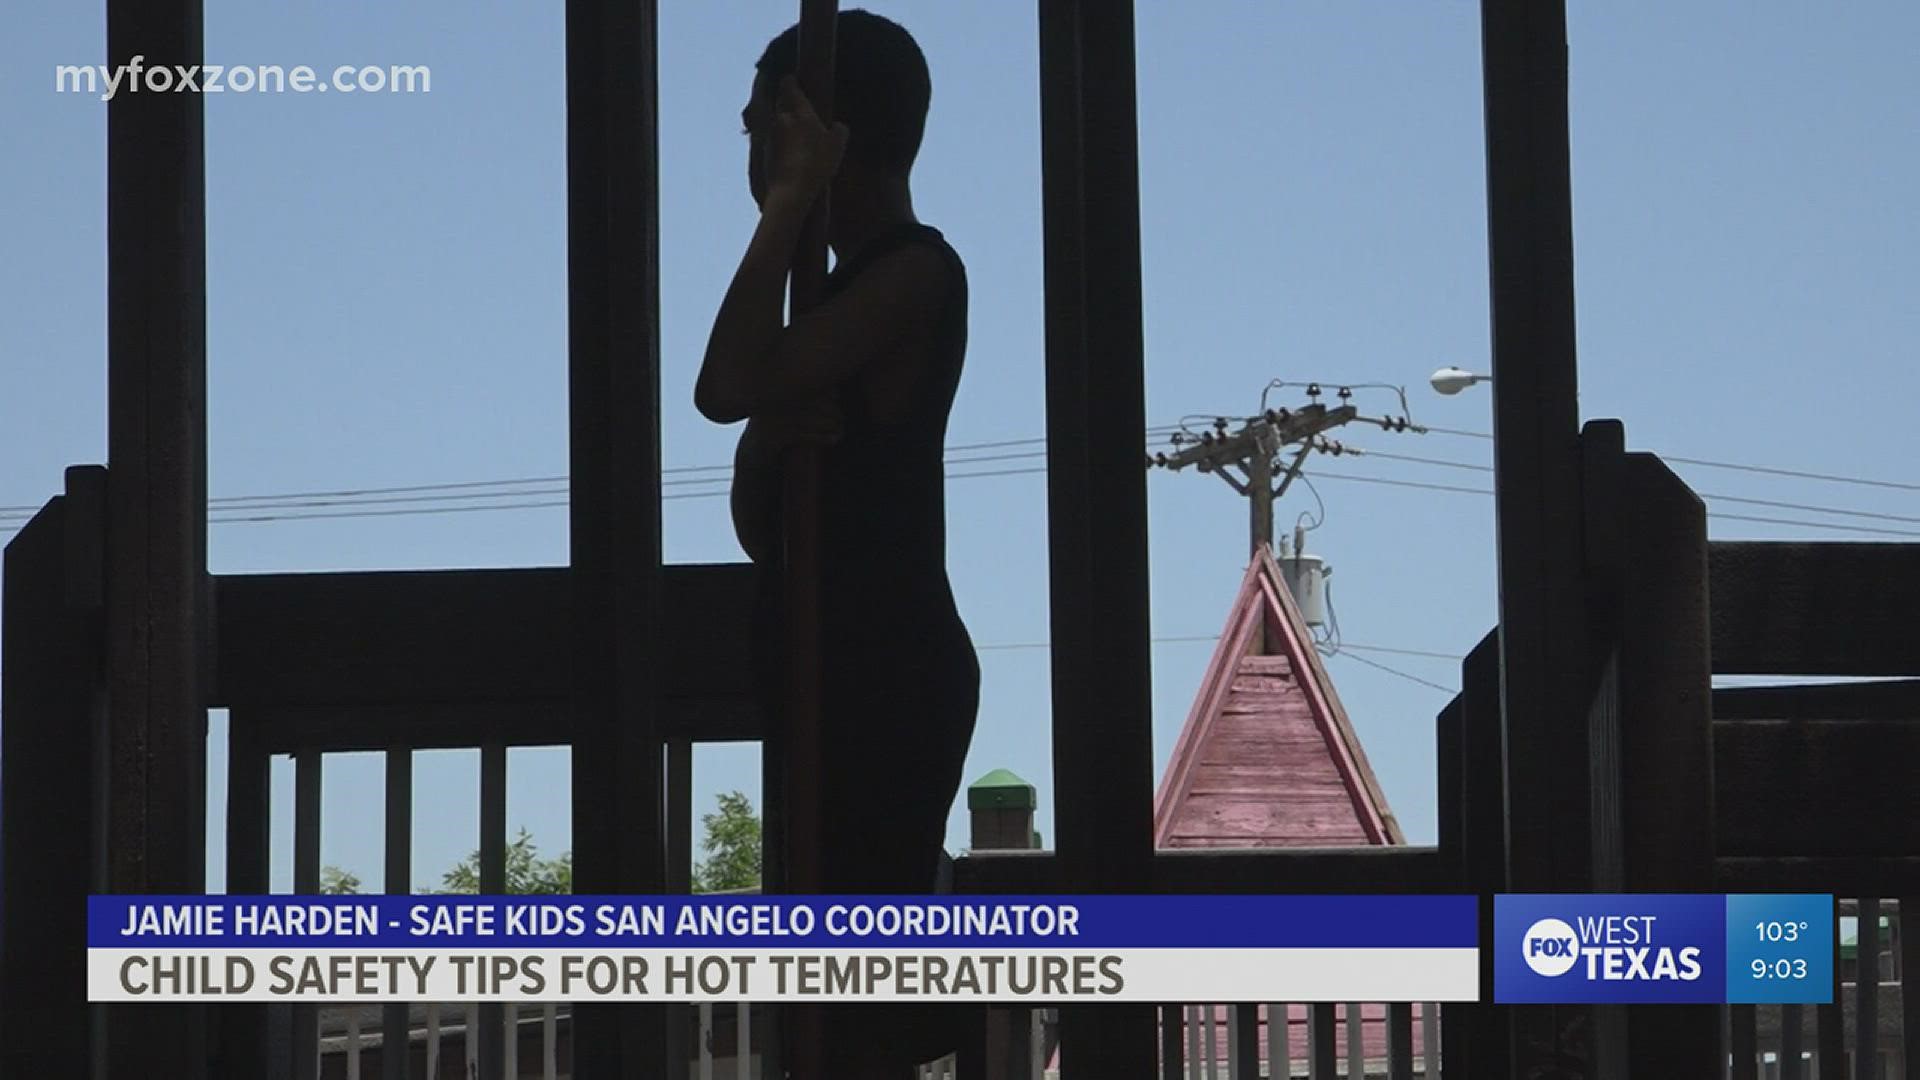 Health experts share tips on keeping children from overheating in triple-digit temperatures.